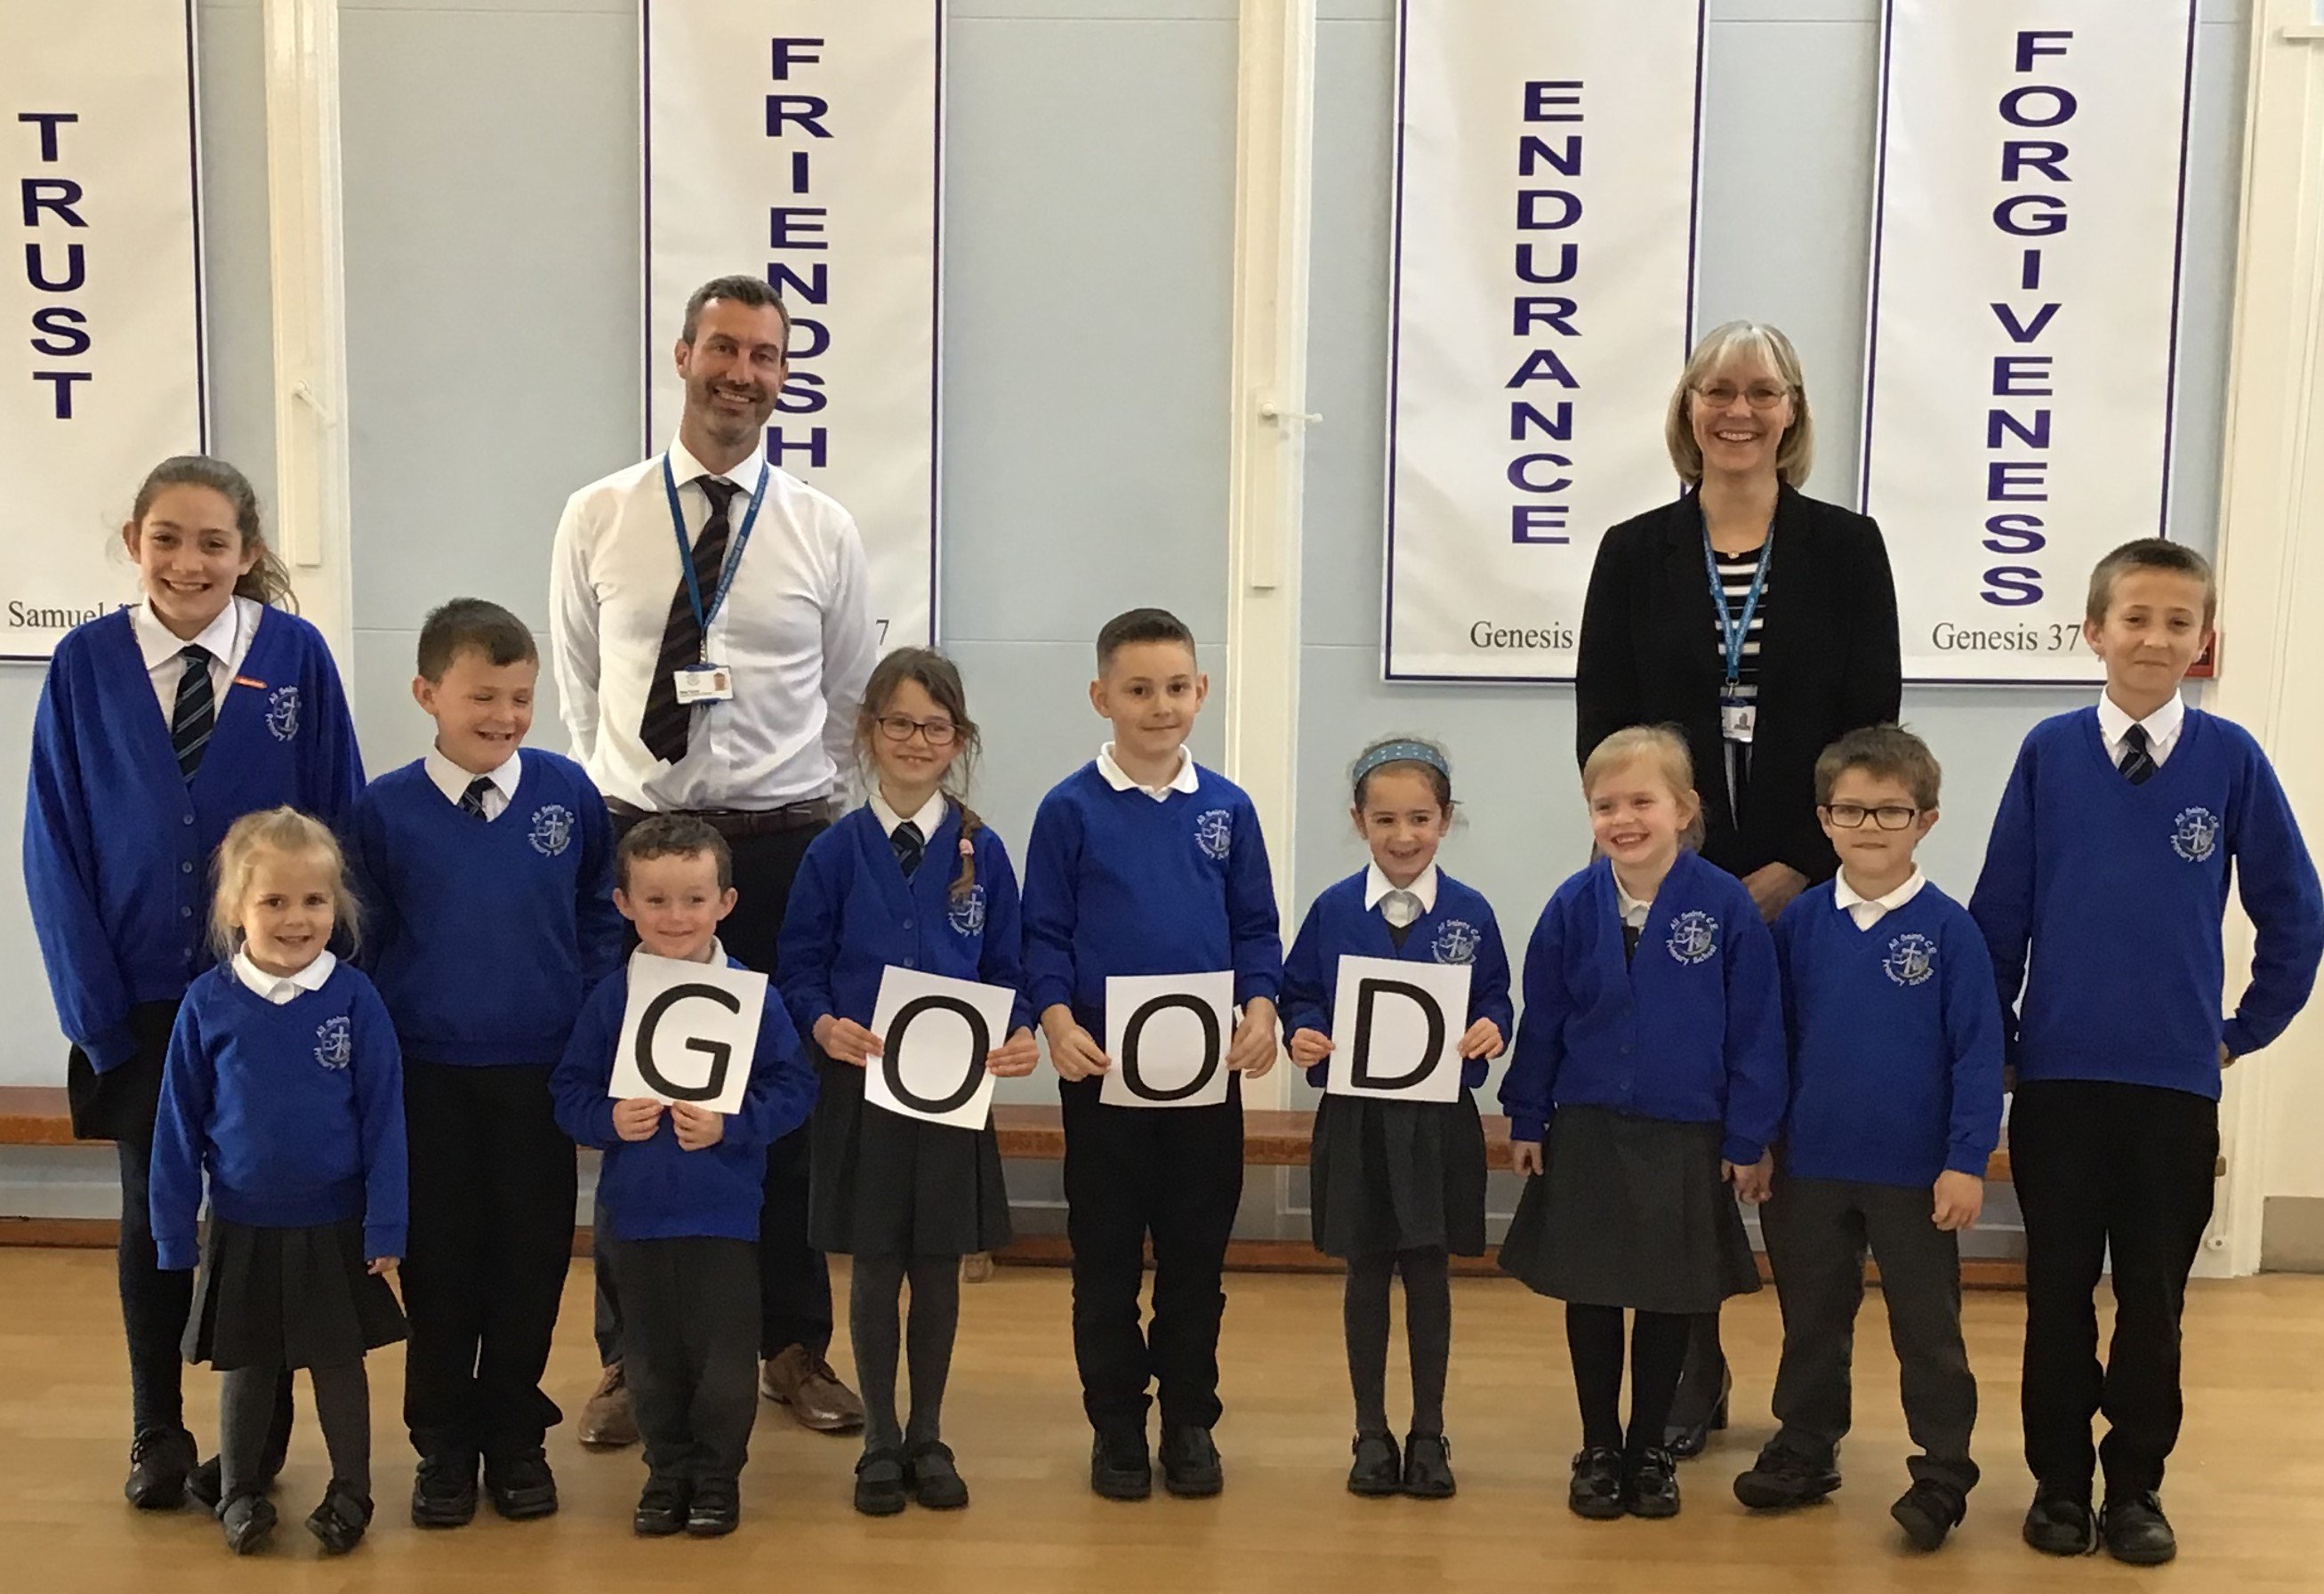 We are a vibrant, creative and ambitious primary school in Sidley, Bexhill. We are proud of our accomplishments and set no ceiling on what pupils can achieve.